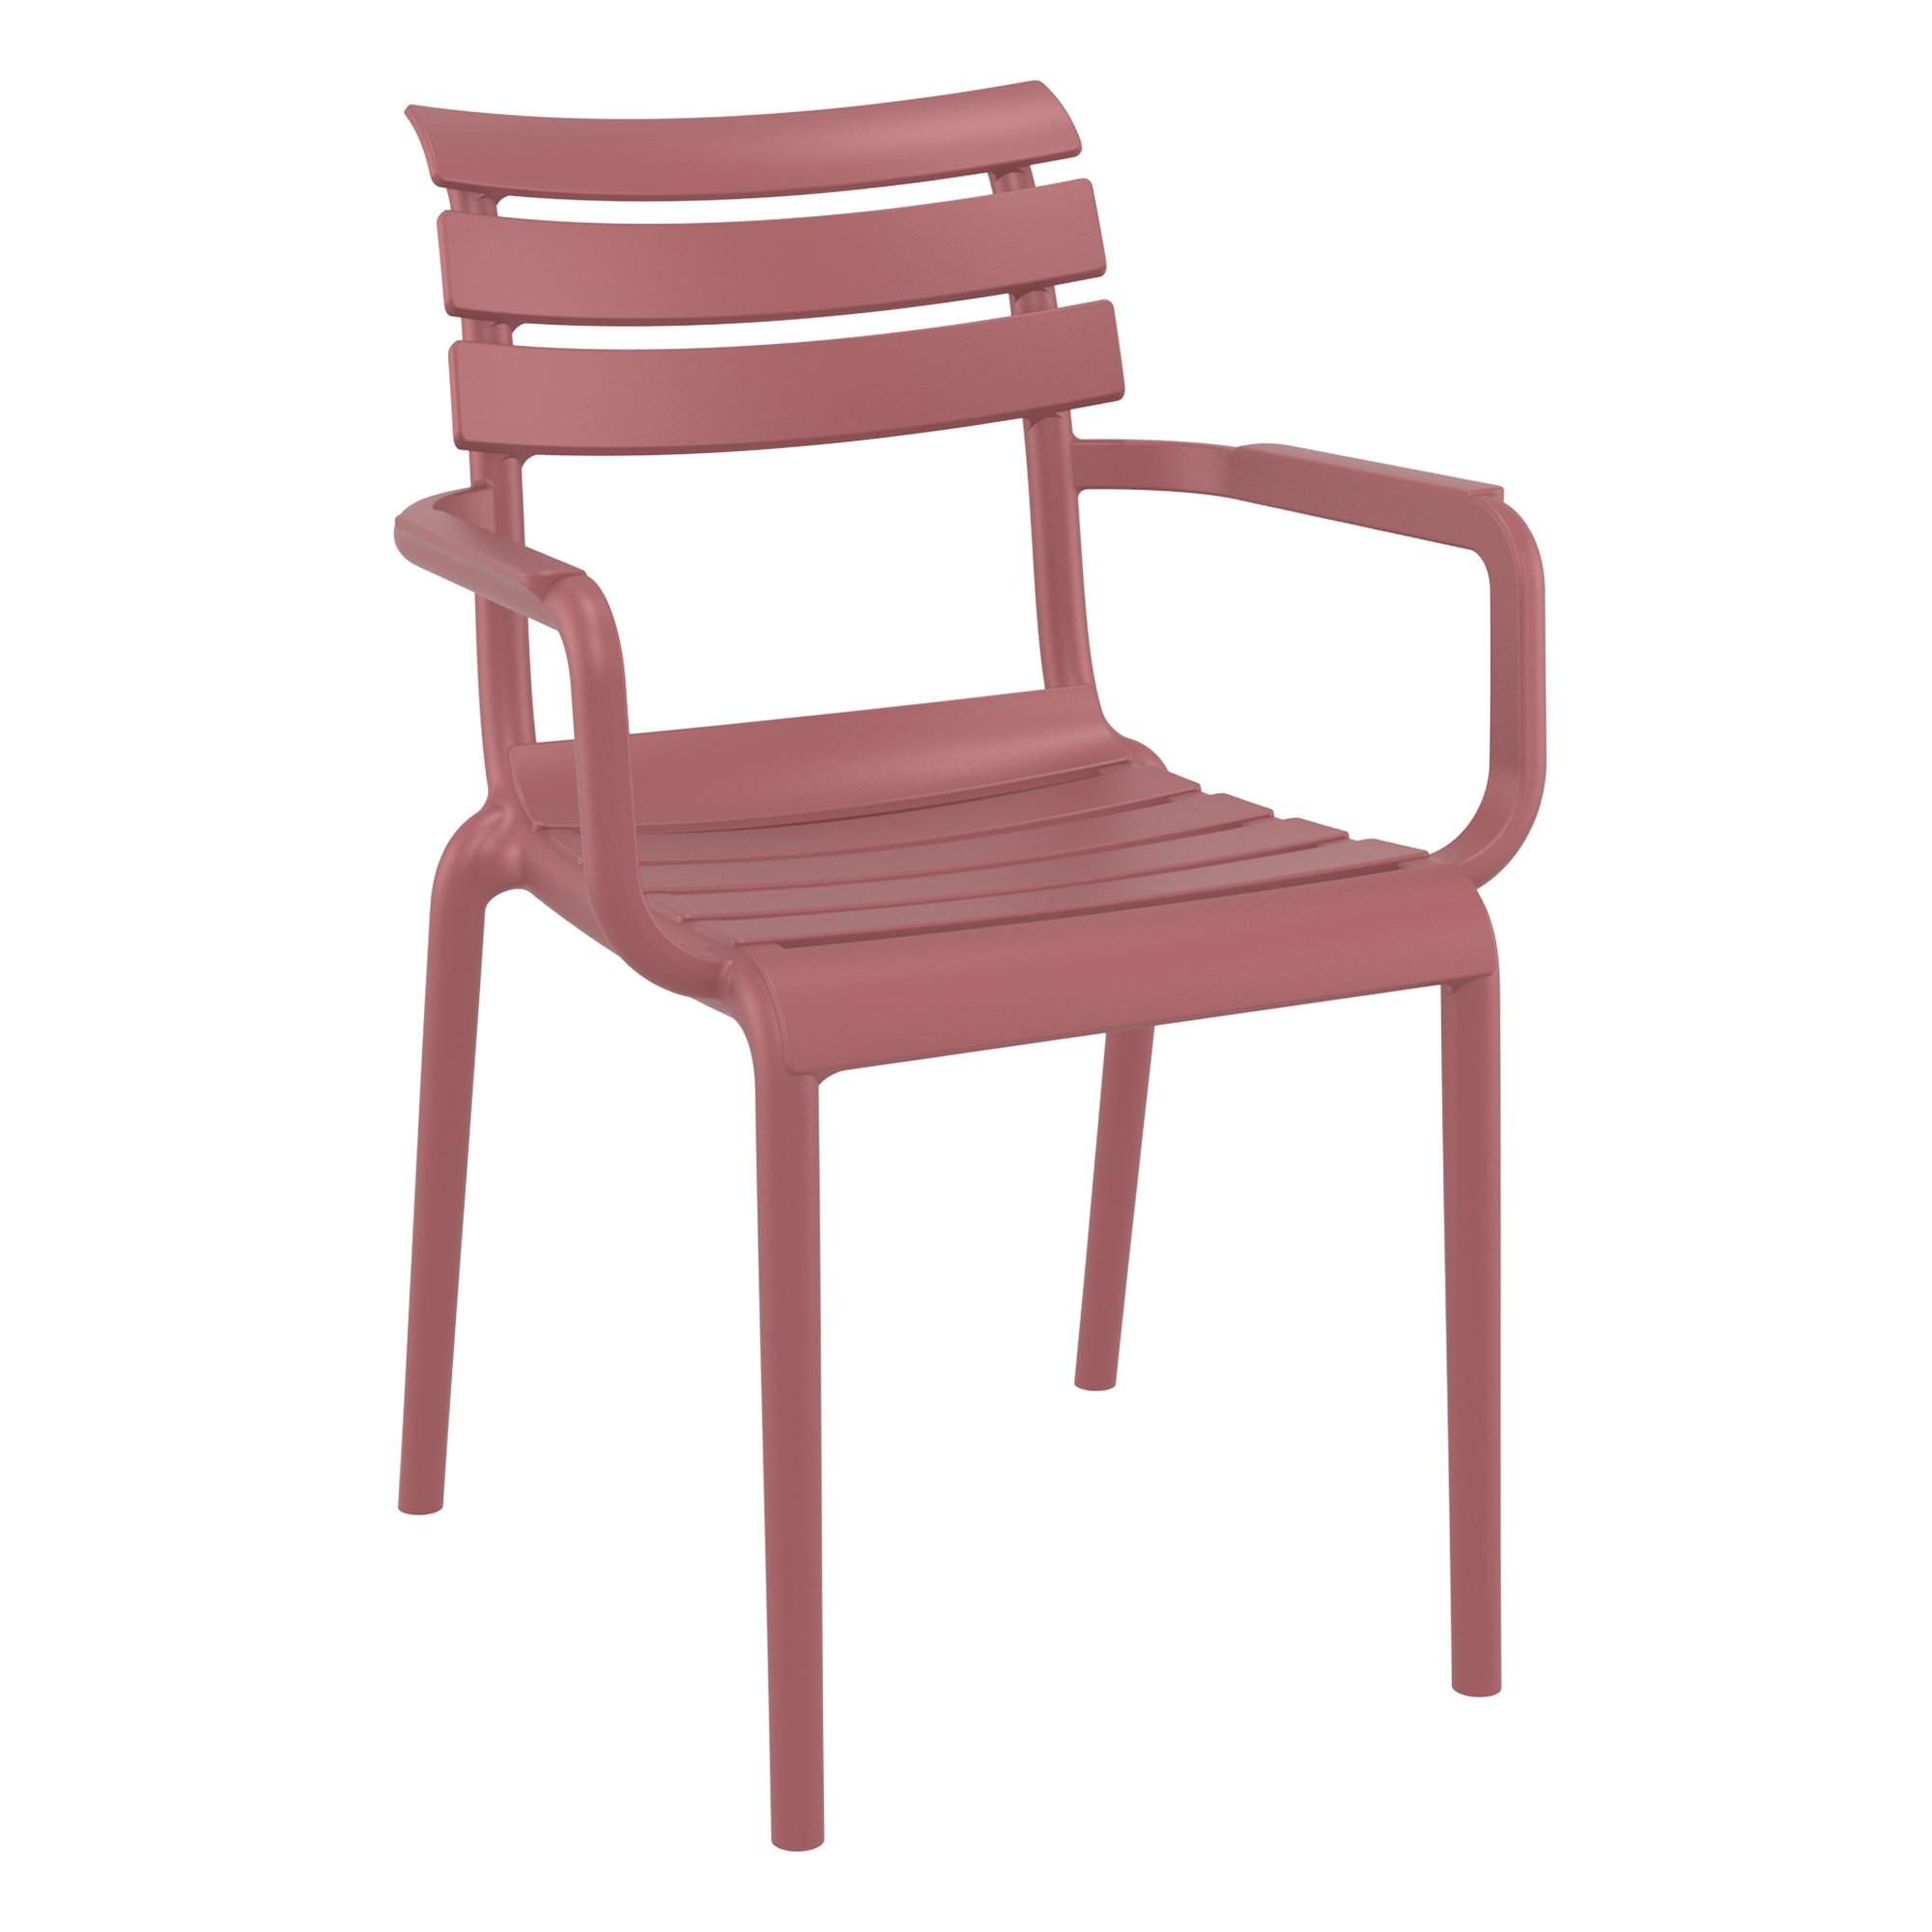 Marsala Sofia Stackable Armchair for Indoor and Outdoor Use